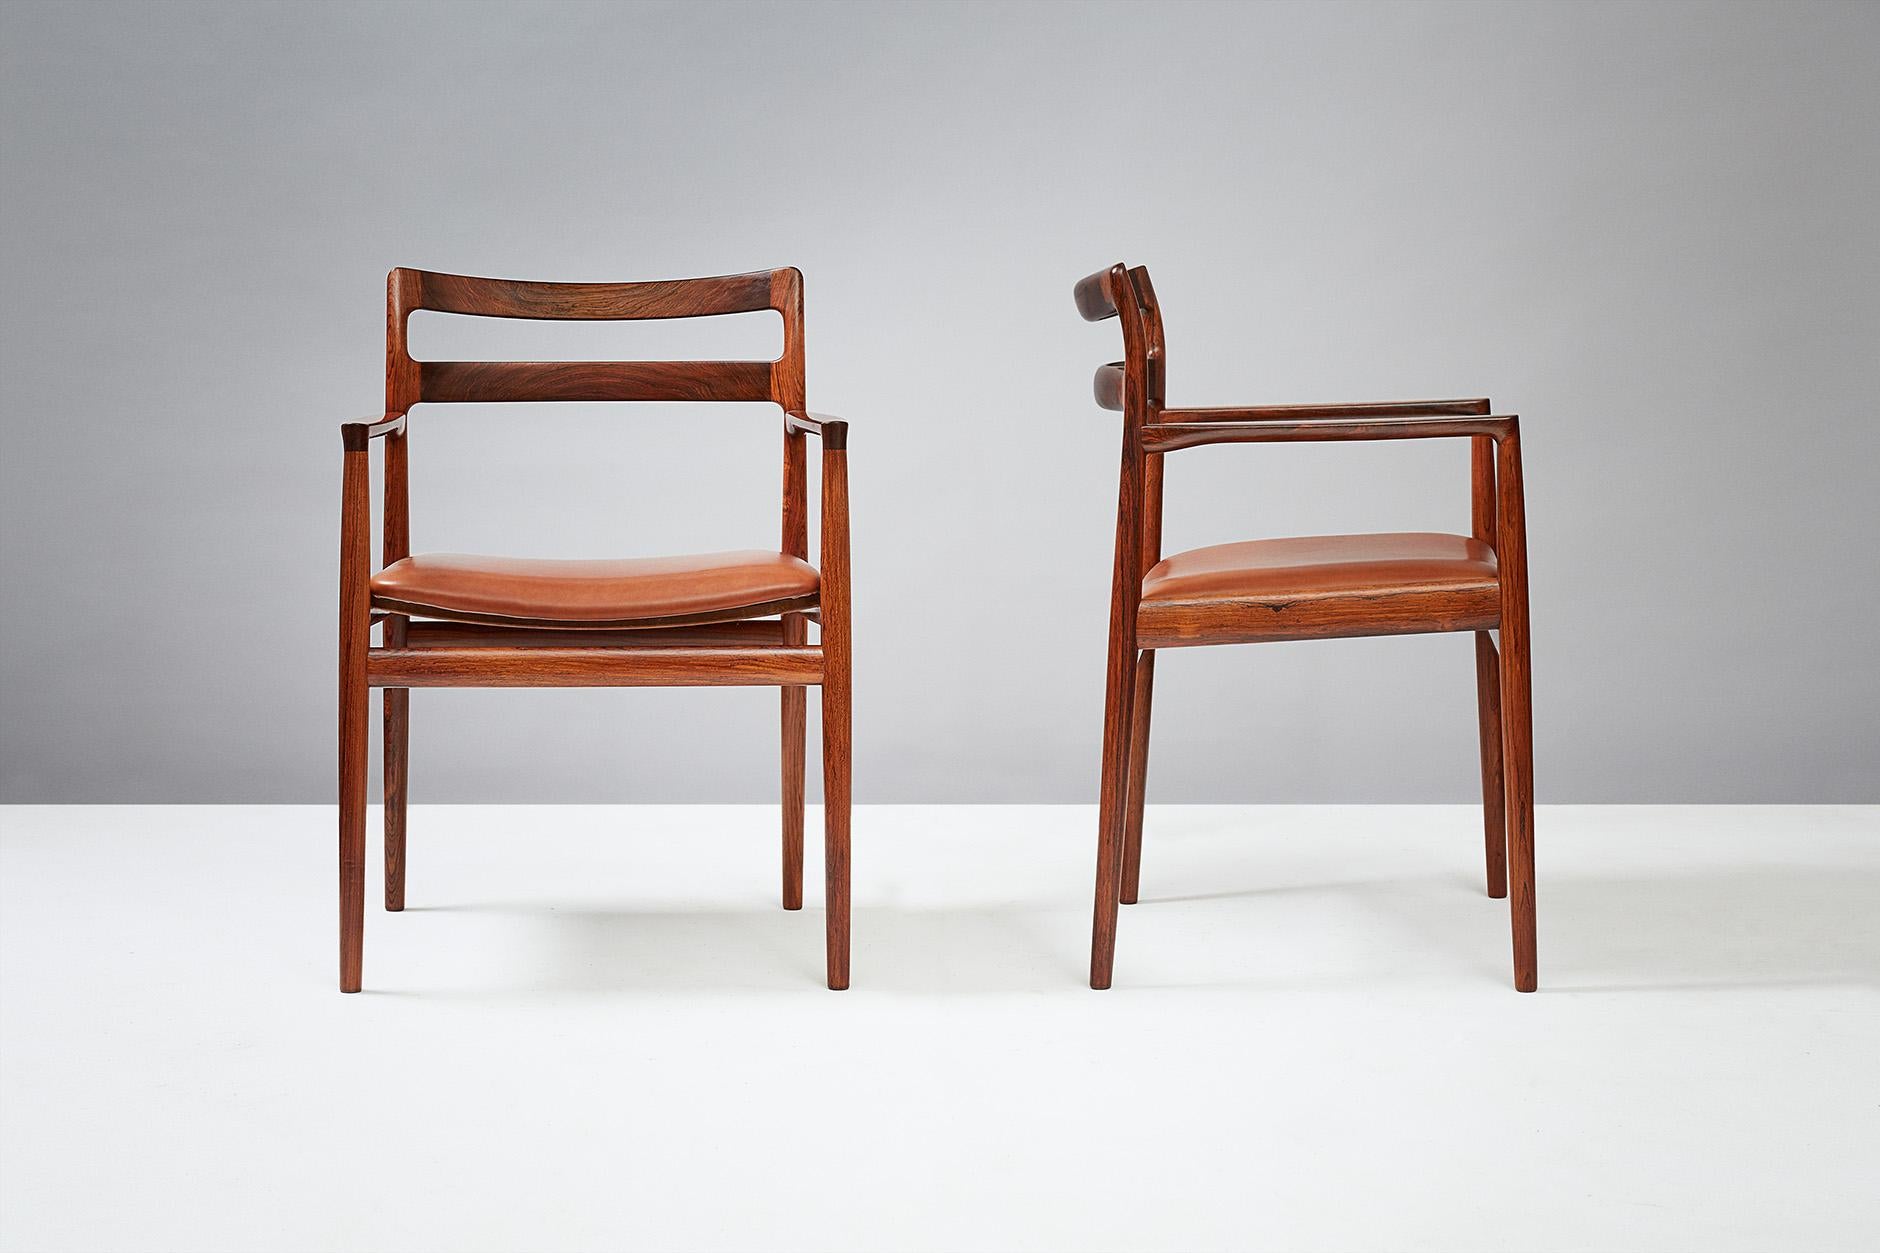 Johannes Norgaard (attributed)

Armchairs, circa 1960

Pair of armchairs attributed to Johannes Norgaard and produced by Norgaard Mobelfabrik, circa 1960. Seats upholstered in cognac brown aniline leather.